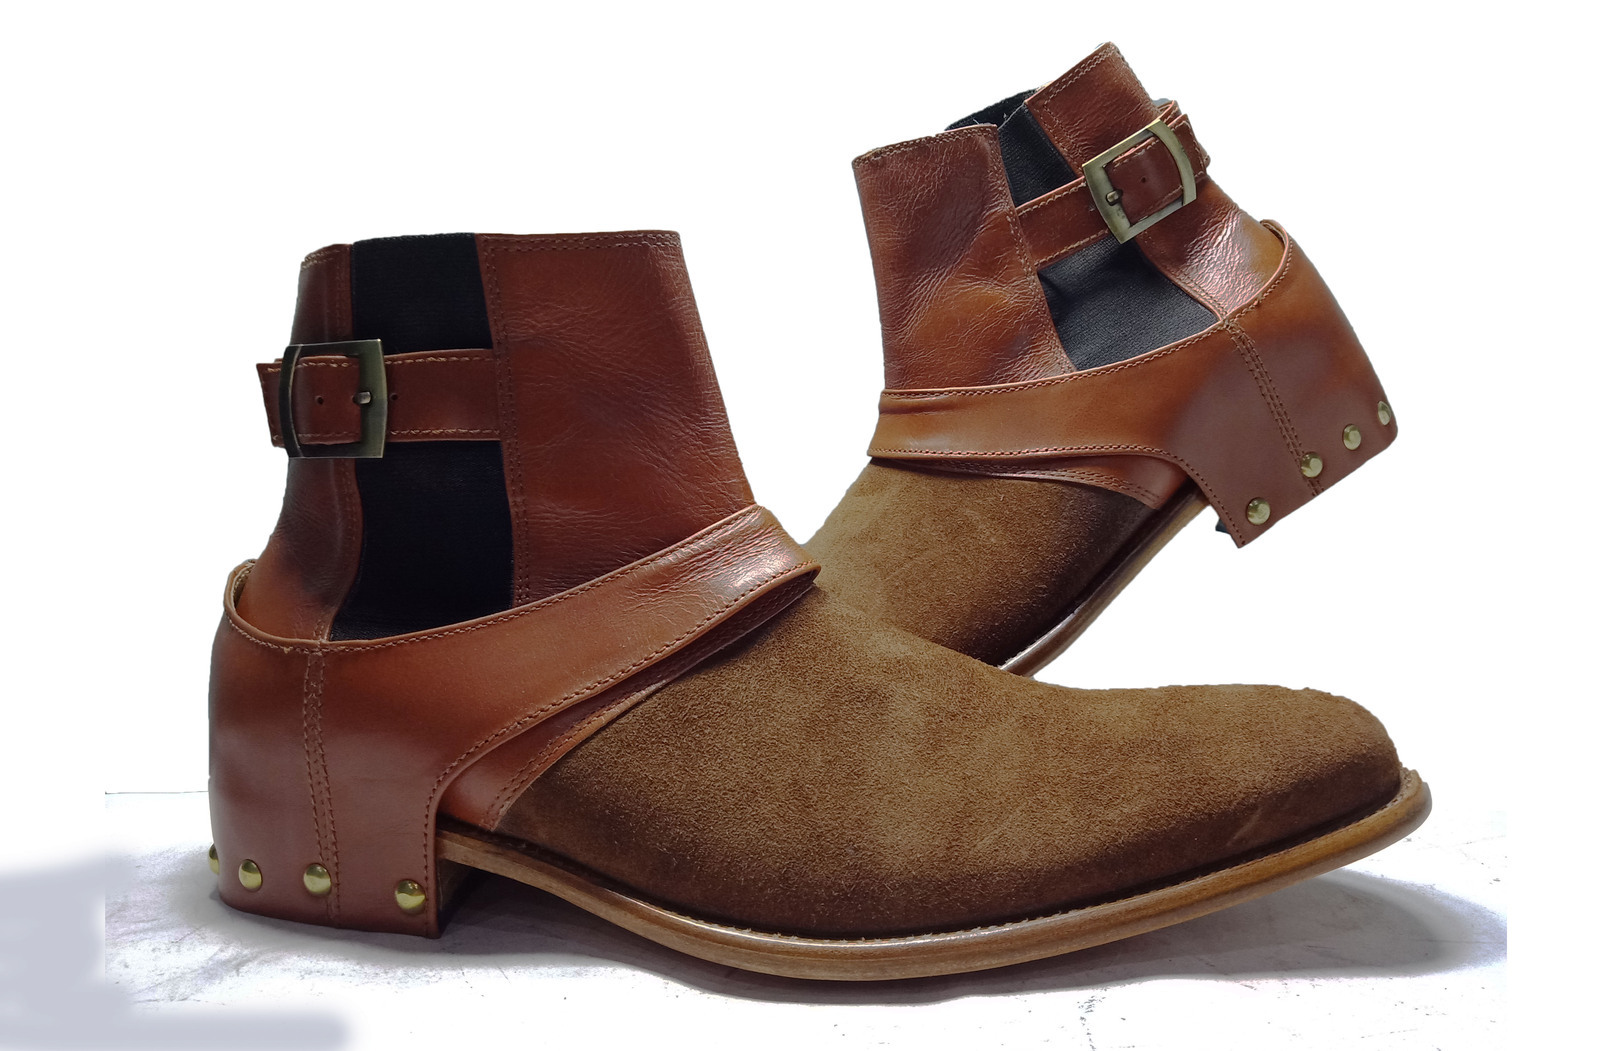 Multi Color High Ankle Rounded Toe Suede Leather Handmade Jodhpur Men Boots - $159.99 - $219.99